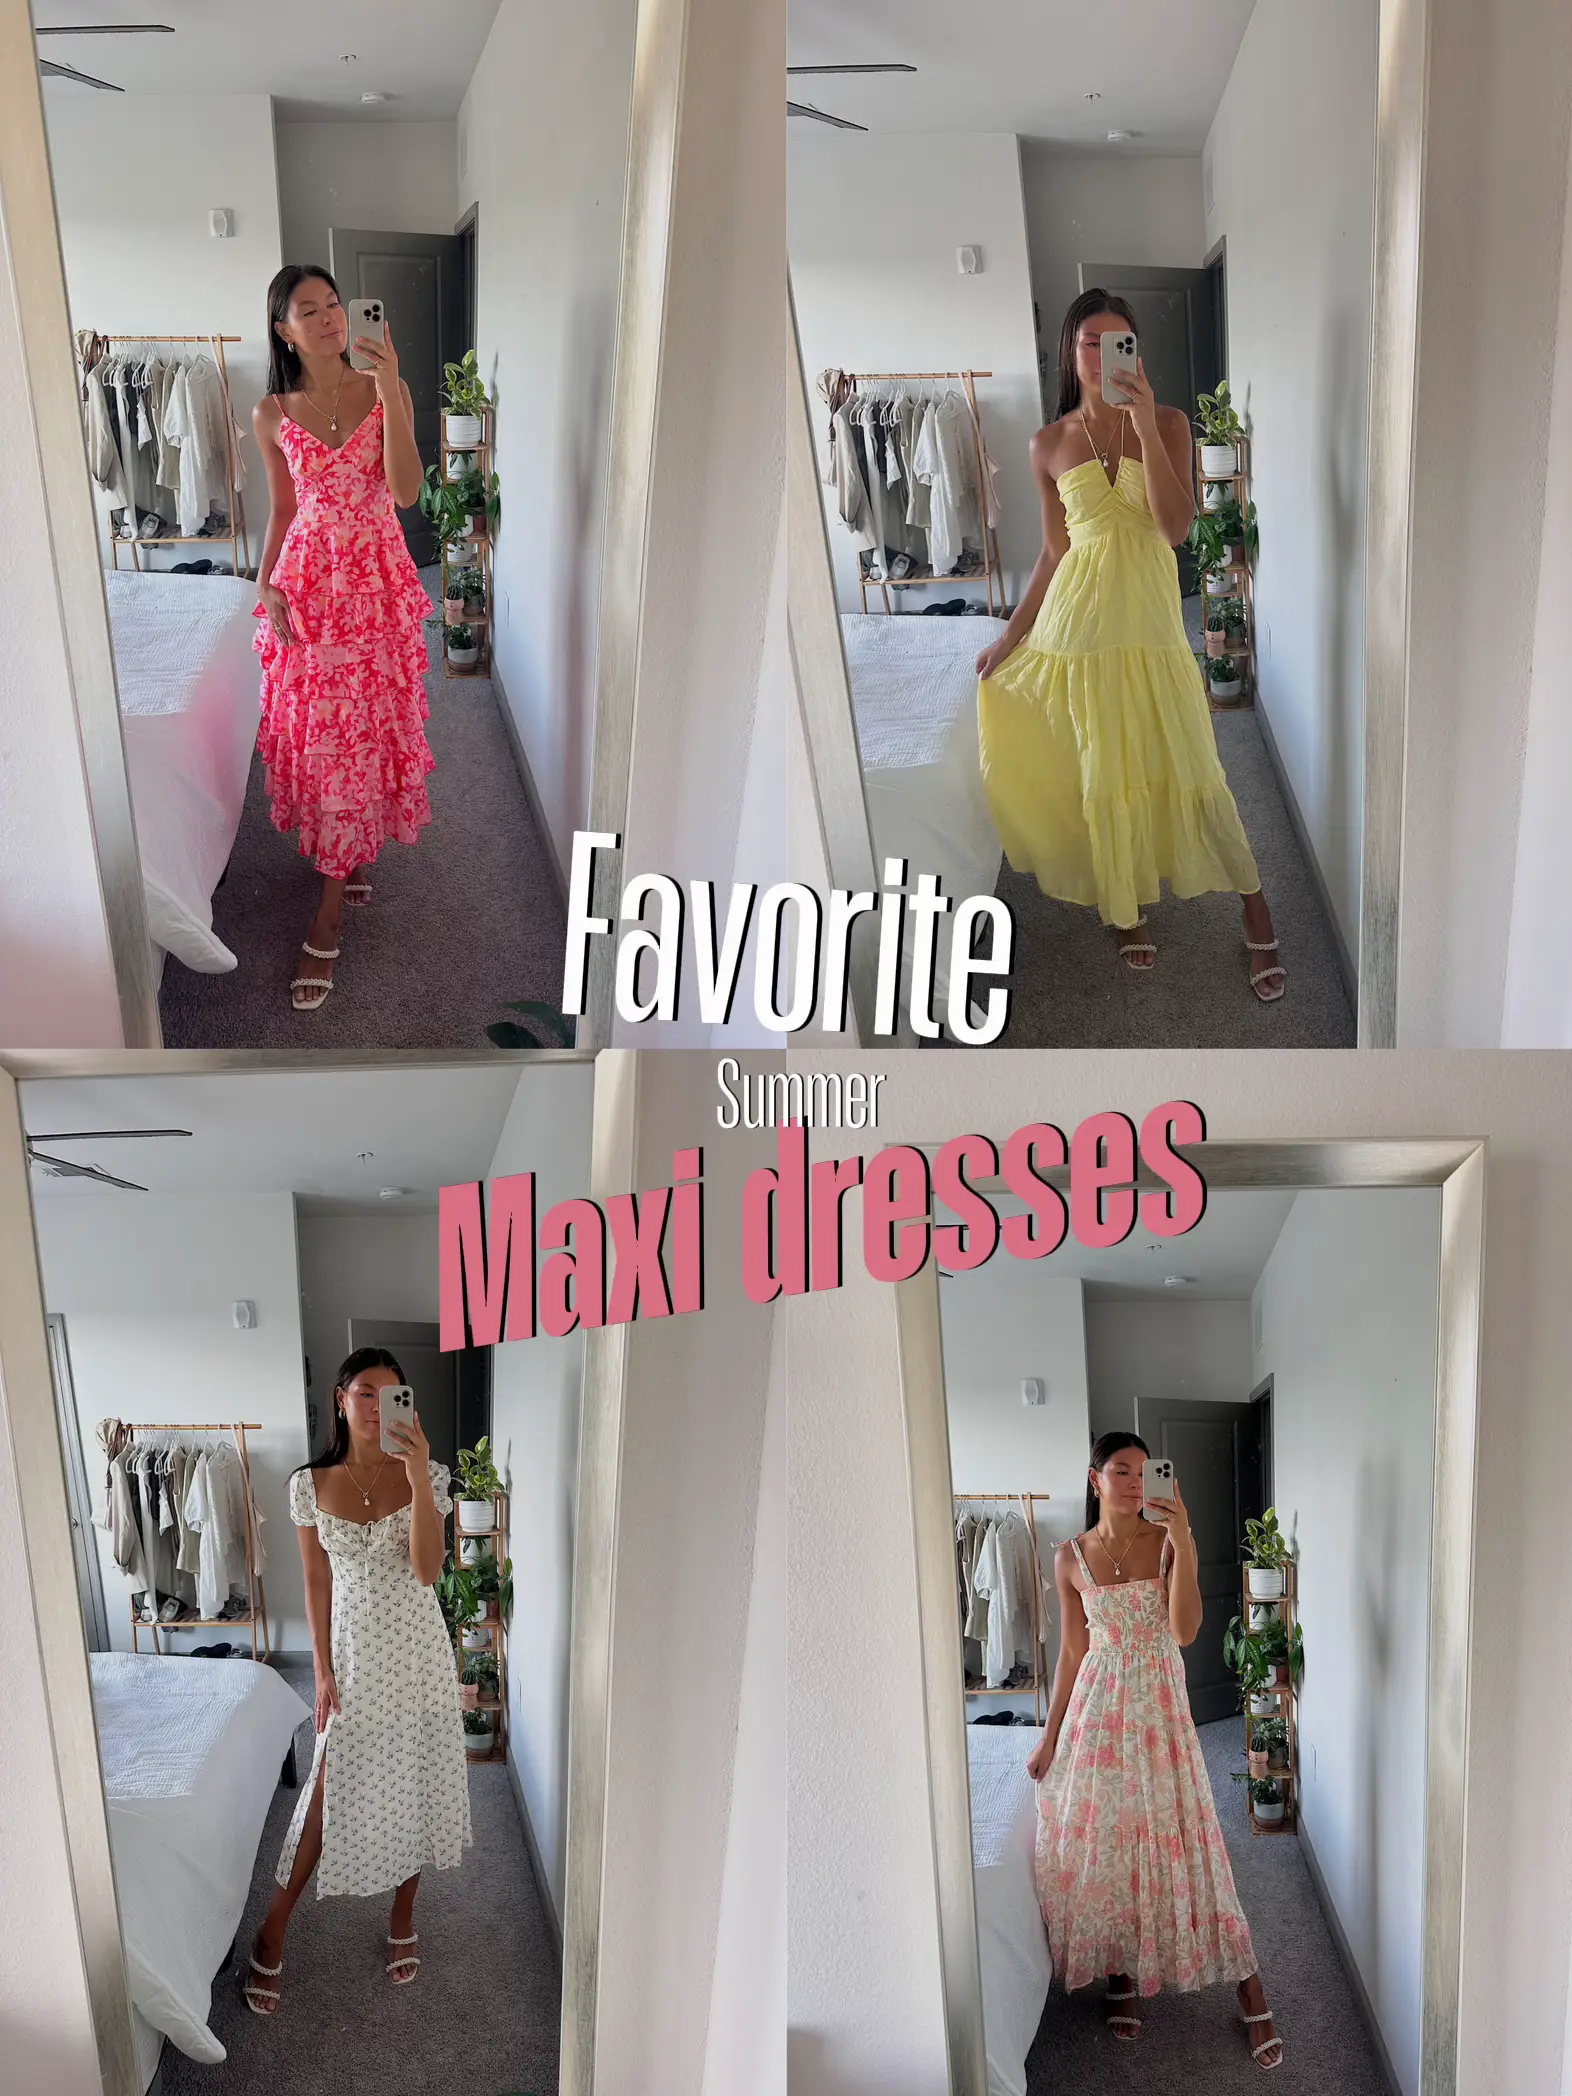 Trying on SKIMS dresses 👗, Gallery posted by Meltem Arifi